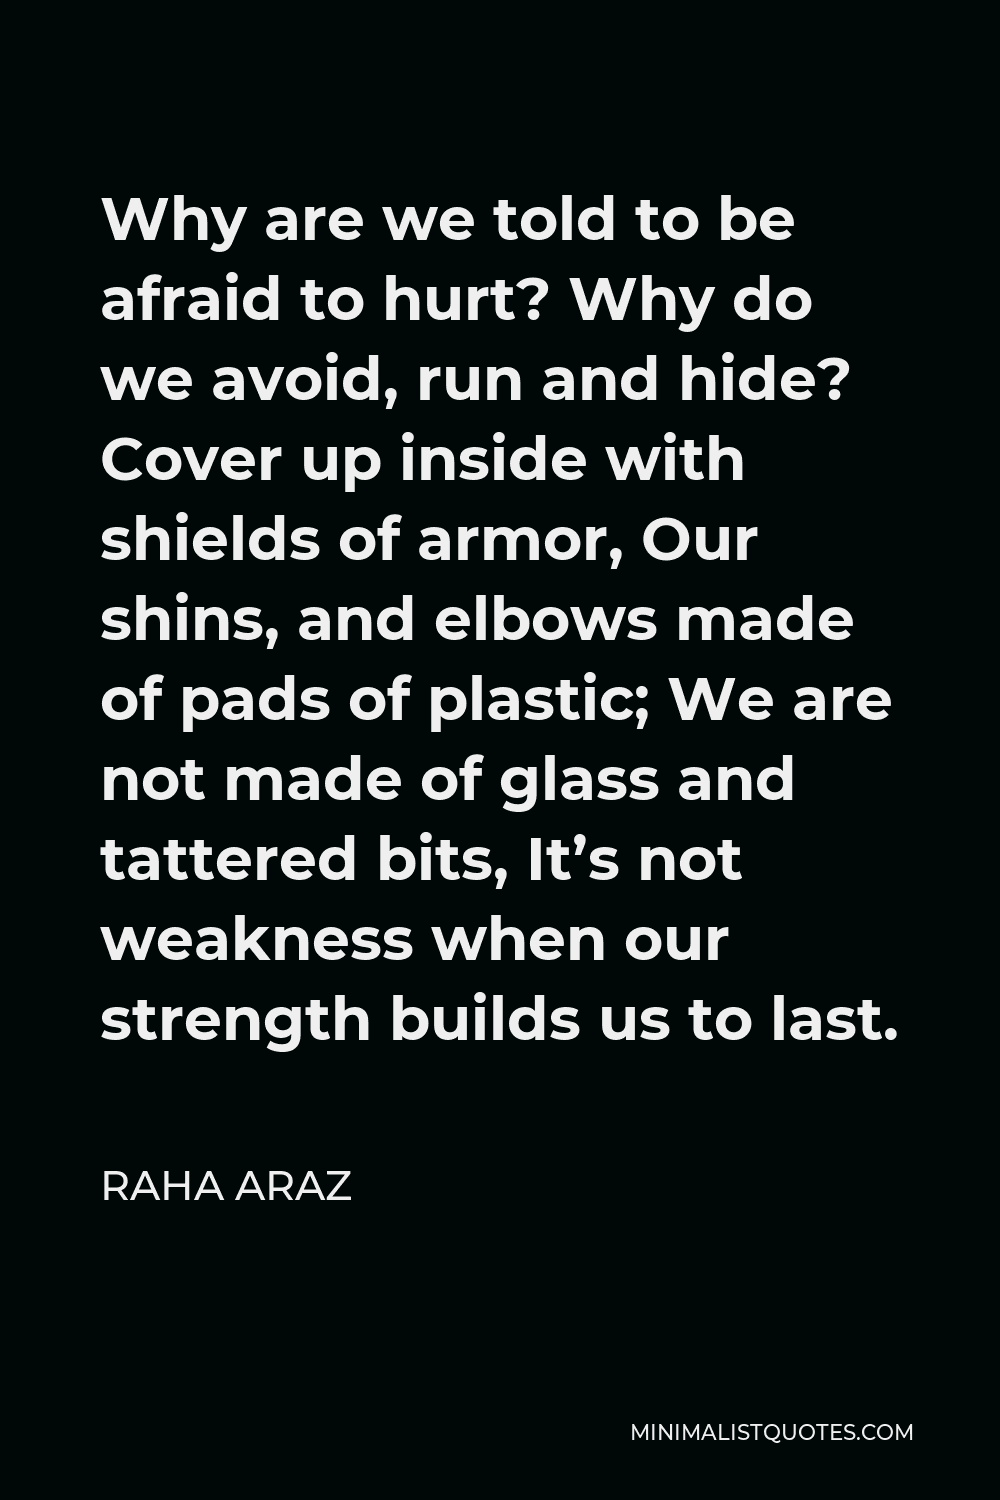 Raha Araz Quote - Why are we told to be afraid to hurt? Why do we avoid, run and hide? Cover up inside with shields of armor, Our shins, and elbows made of pads of plastic; We are not made of glass and tattered bits, It’s not weakness when our strength builds us to last.